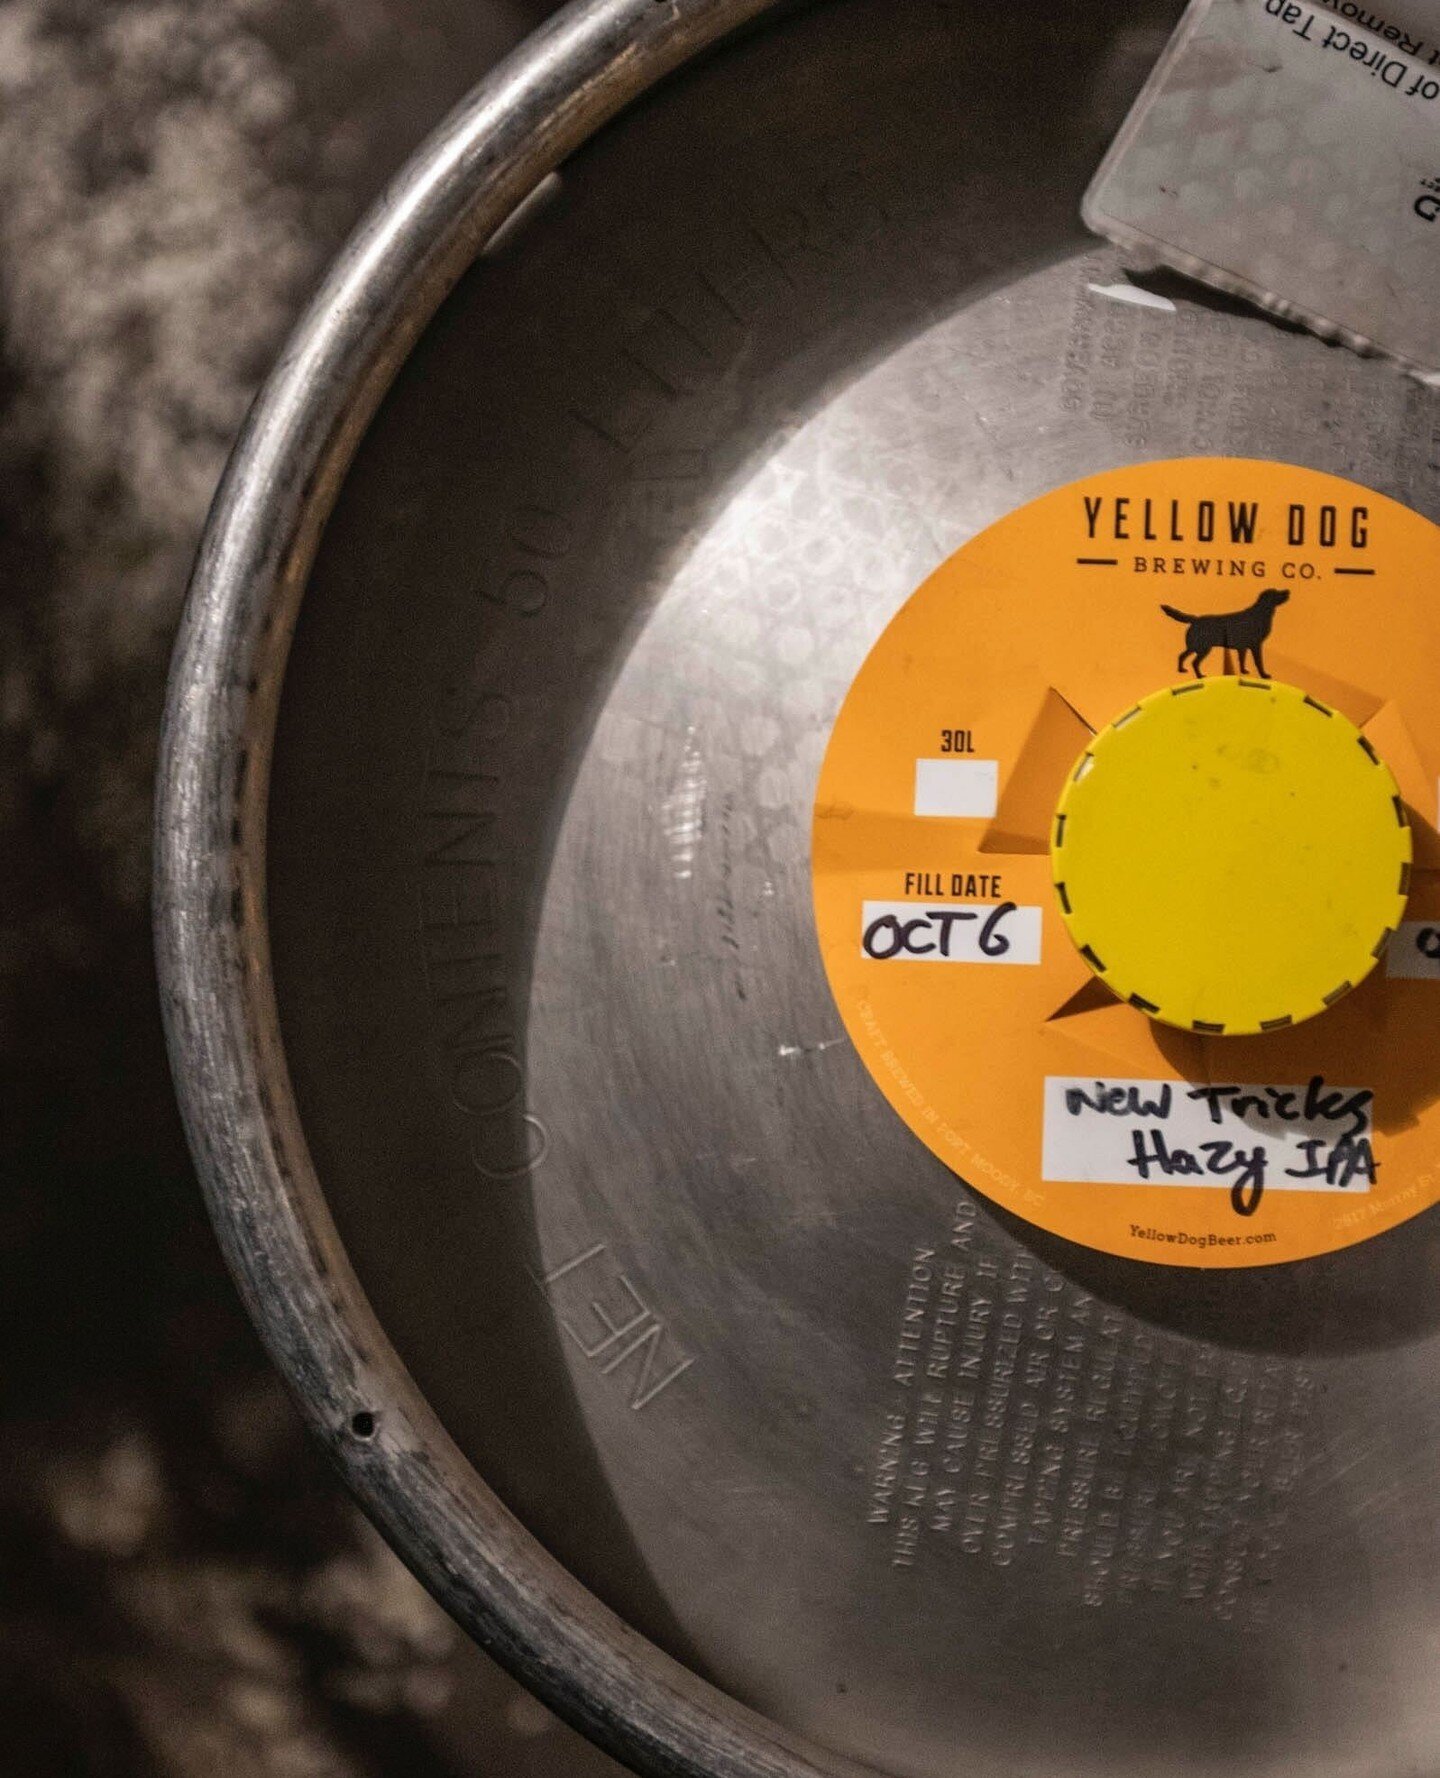 Oh no! Bartender Jordan dropped a keg of Yellow Dog&rsquo;s New Tricks Hazy IPA on his foot. Ouchie!⁠
⁠
To save others from a similar fate, we need you to help us drain this keg. We will not rest until this keg is empty and our staff are safe!⁠
⁠
As 